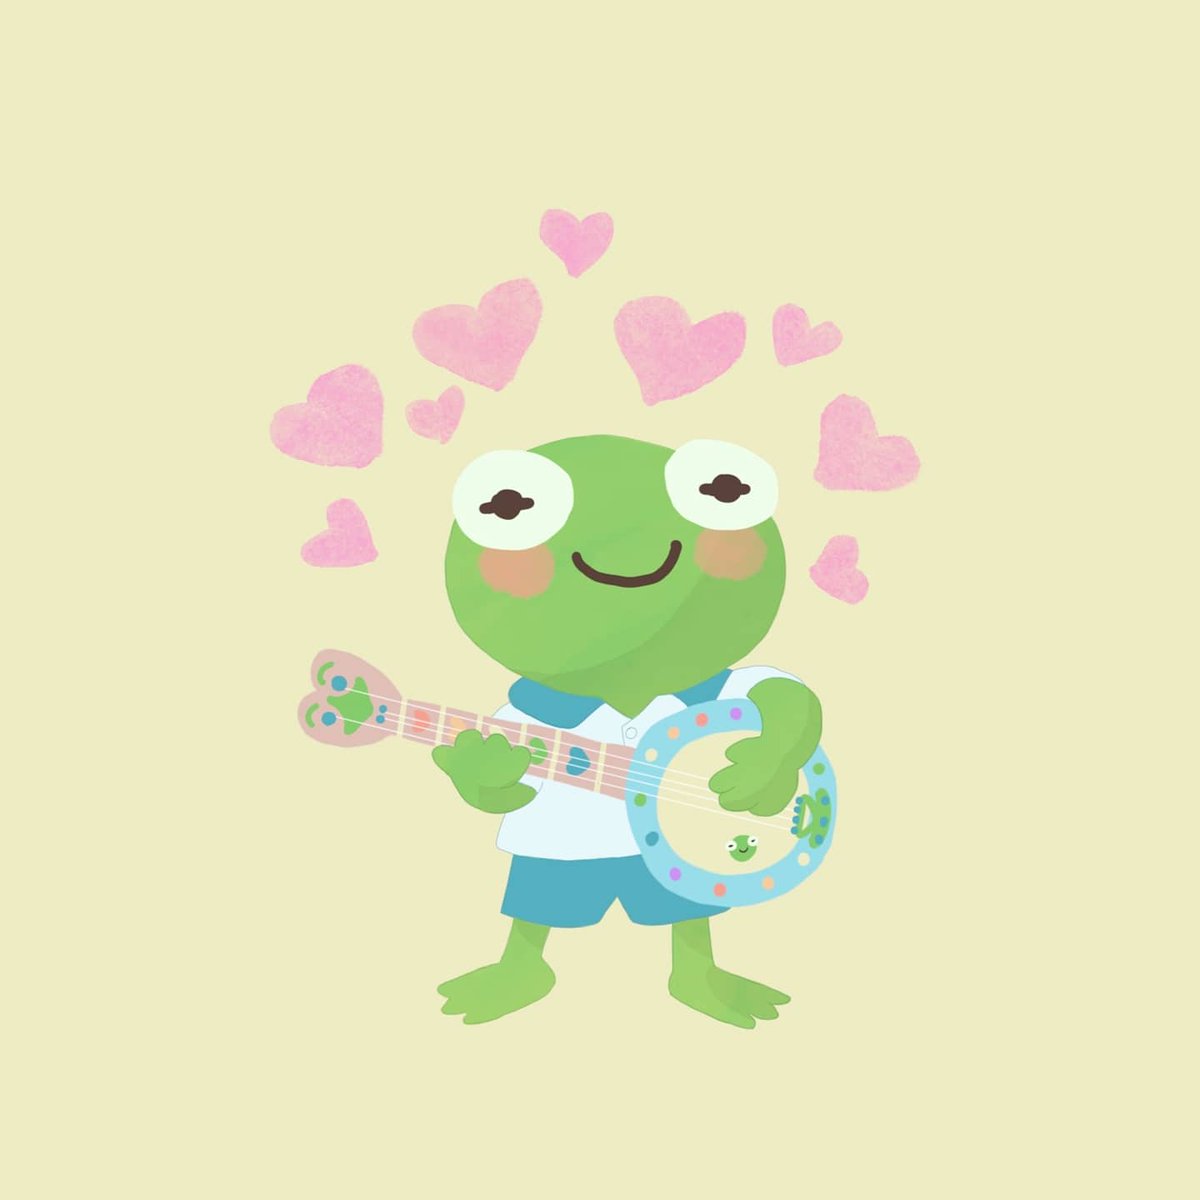 Saw a picture of #babykermit He is so cute I had to draw him 💗
#KermitTheFrog #Disney #illustration